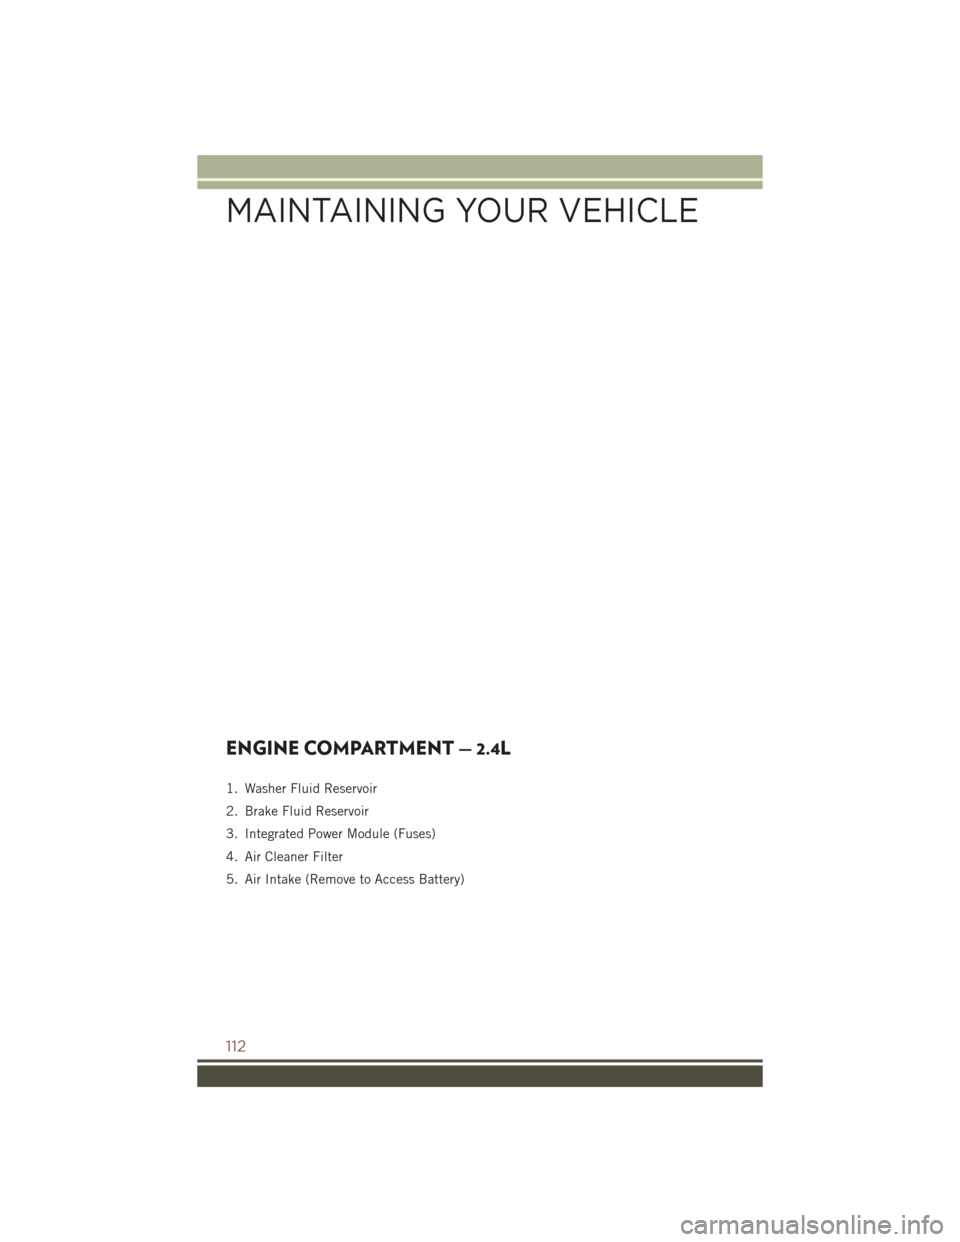 JEEP COMPASS 2016 1.G User Guide ENGINE COMPARTMENT — 2.4L
1. Washer Fluid Reservoir
2. Brake Fluid Reservoir
3. Integrated Power Module (Fuses)
4. Air Cleaner Filter
5. Air Intake (Remove to Access Battery)
MAINTAINING YOUR VEHICL